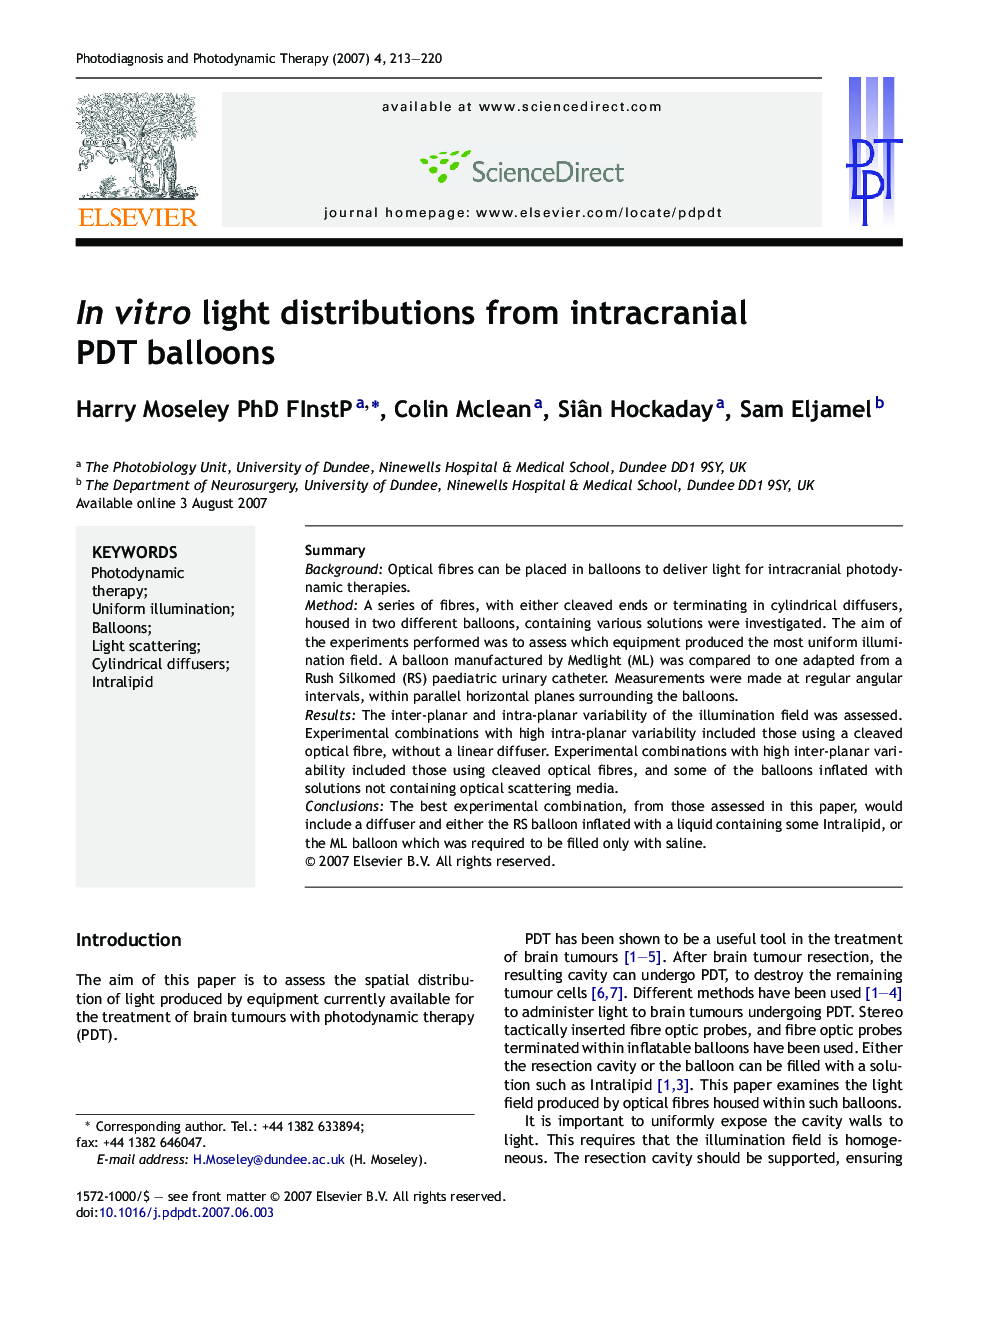 In vitro light distributions from intracranial PDT balloons